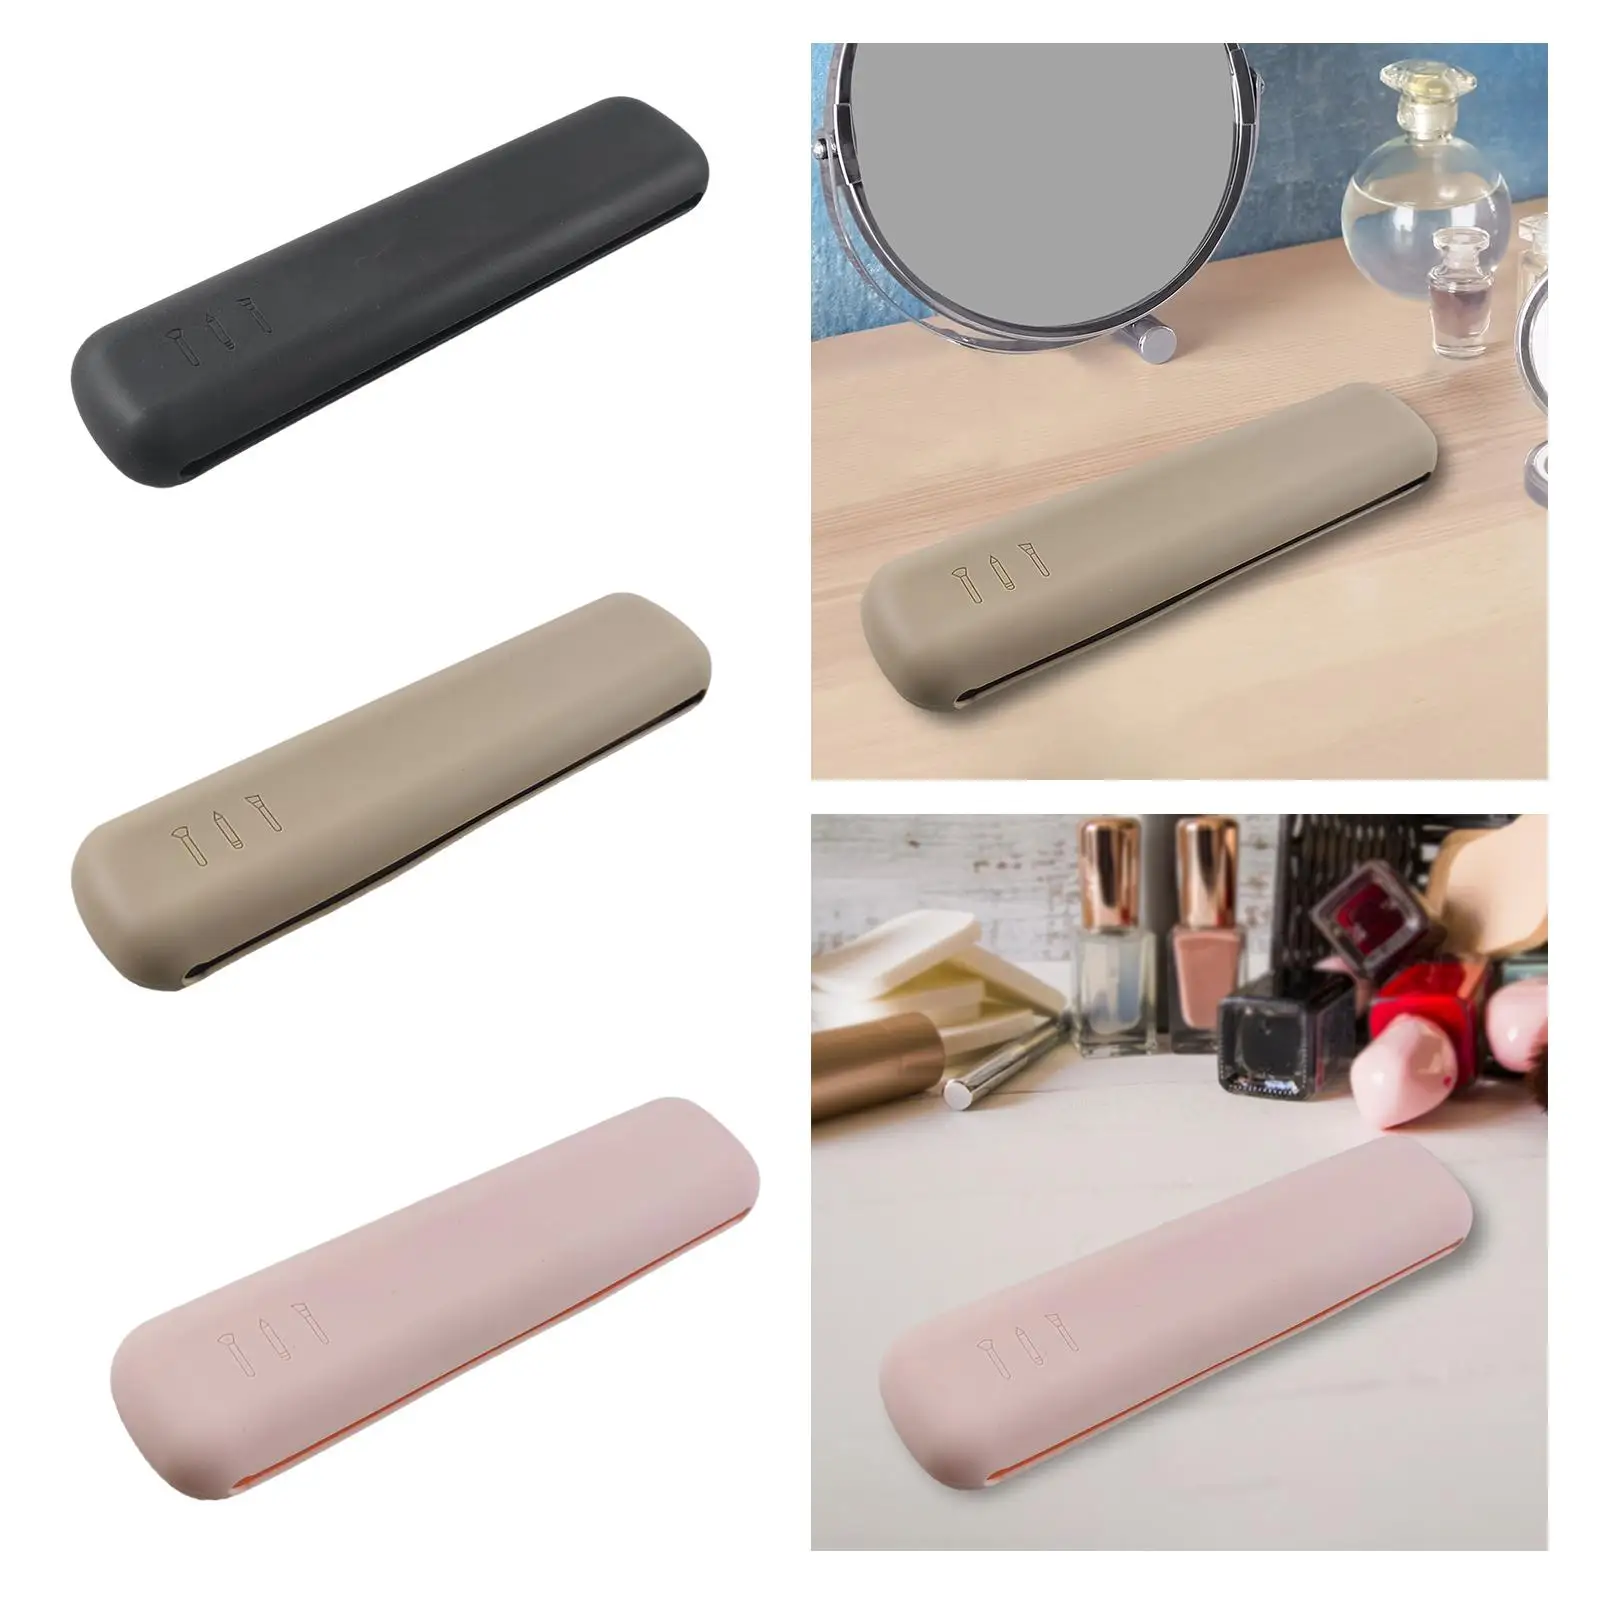 Portable Silicon Makeup Brush Holder Makeup Tools Organizer Waterproof Pouch Cosmetic Face Brushes Holder for Lady Girls Women